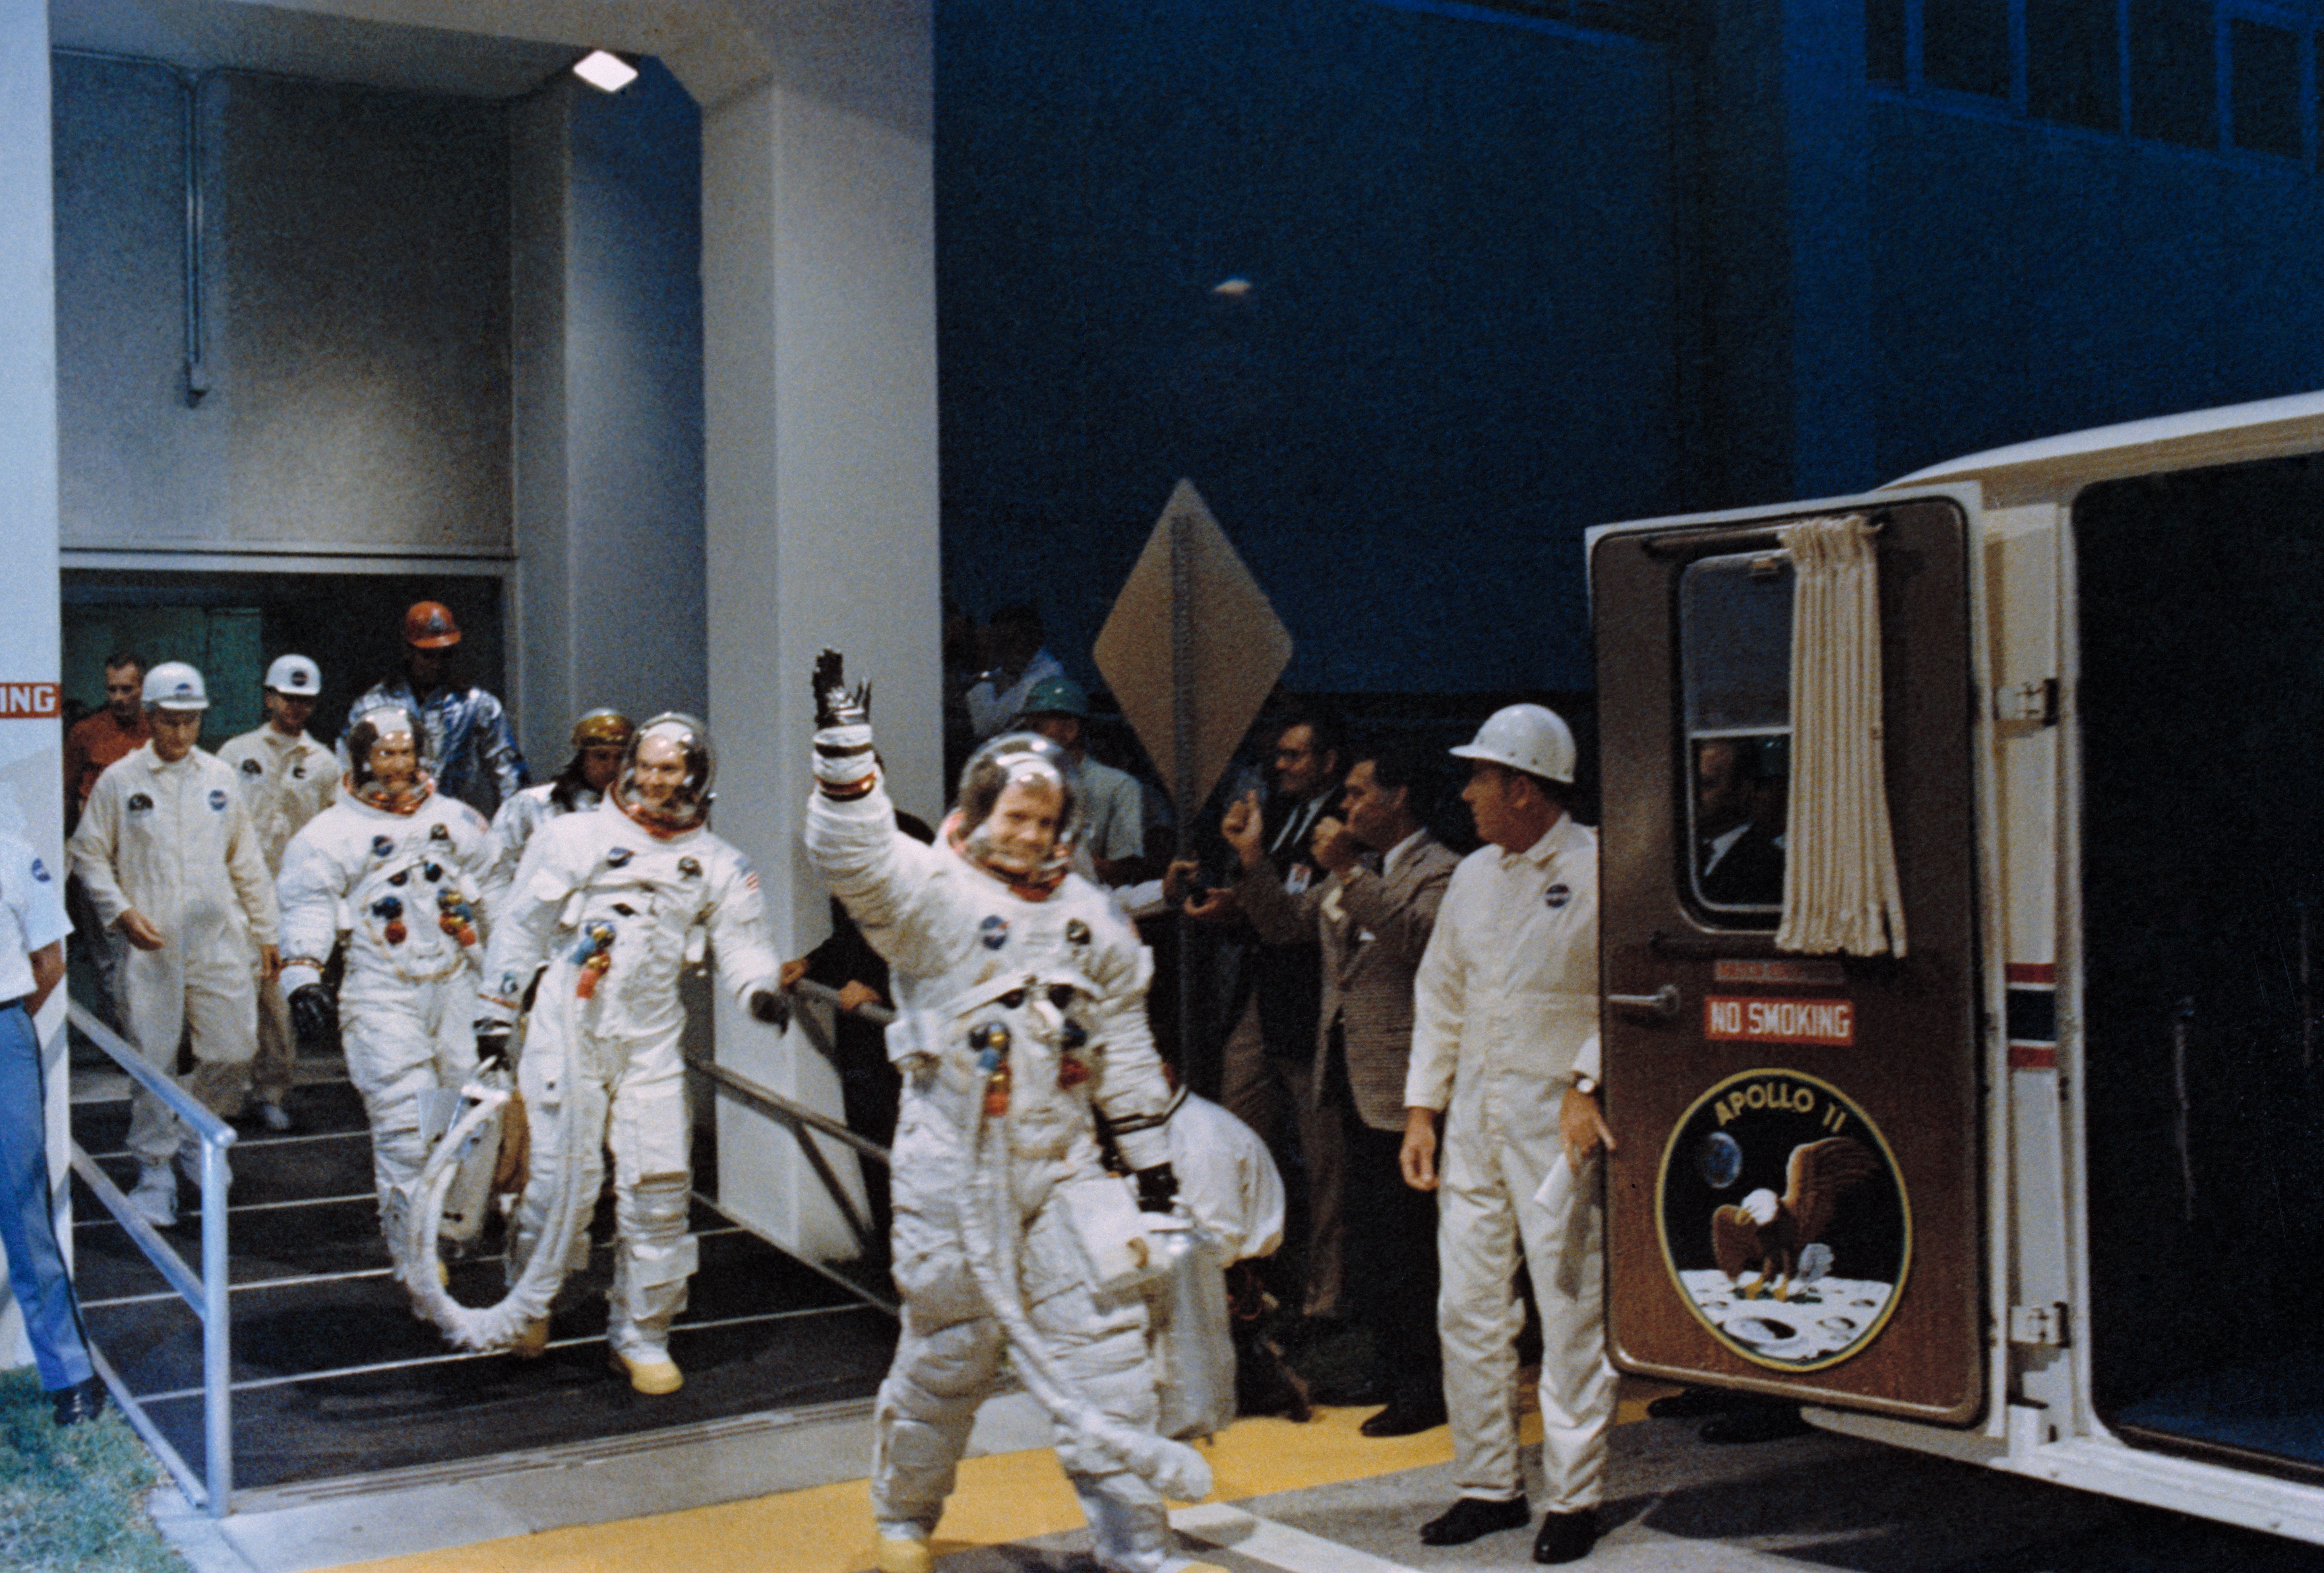 Apollo 11 astronauts wave at NASA personnel as they prepare to kick-start the mission on July 16, 1969.